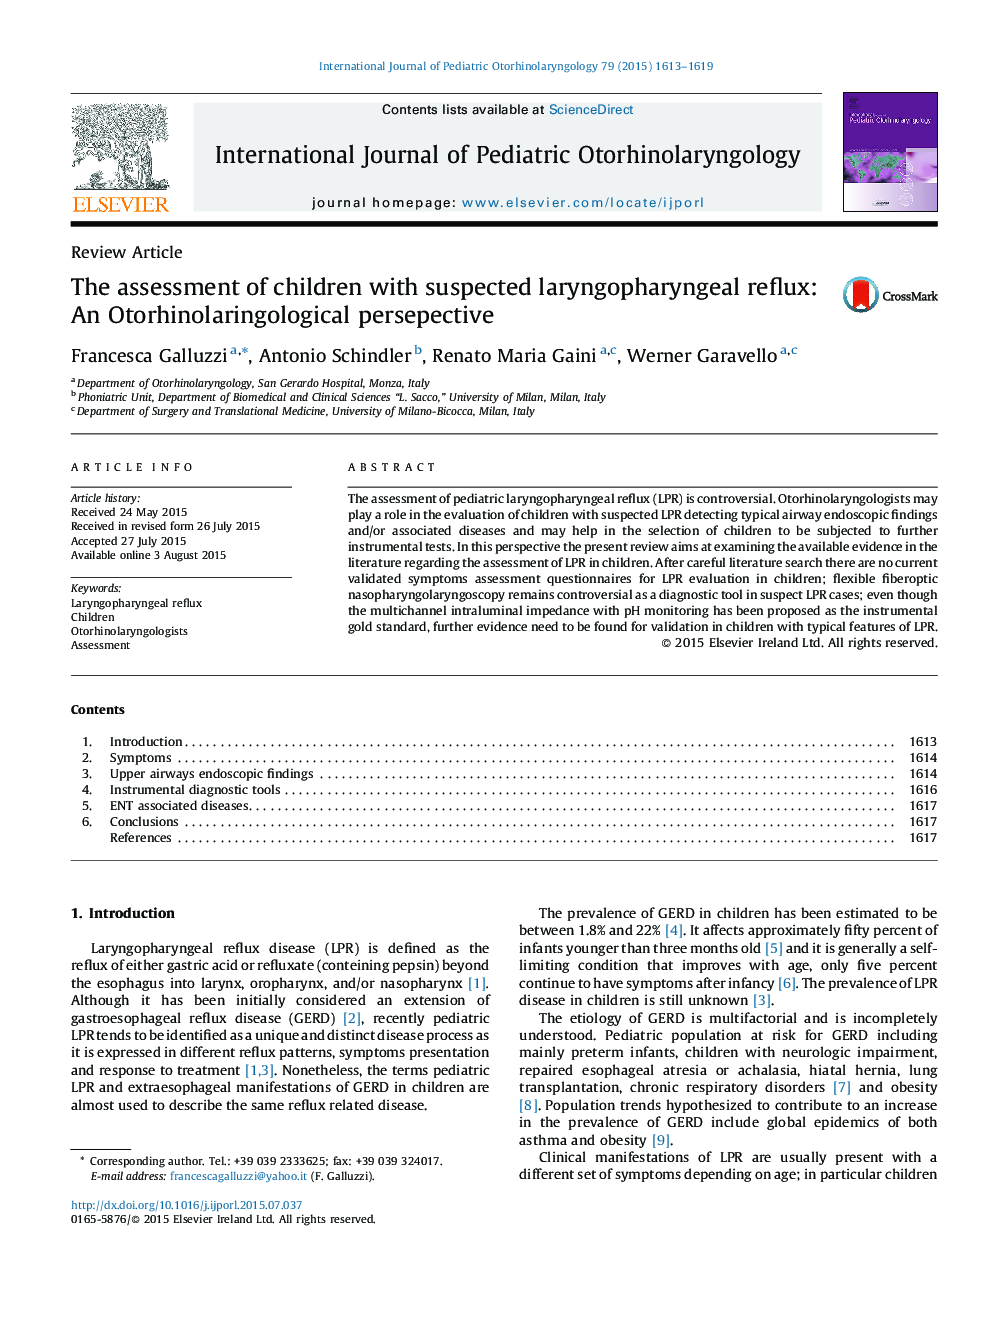 The assessment of children with suspected laryngopharyngeal reflux: An Otorhinolaringological persepective